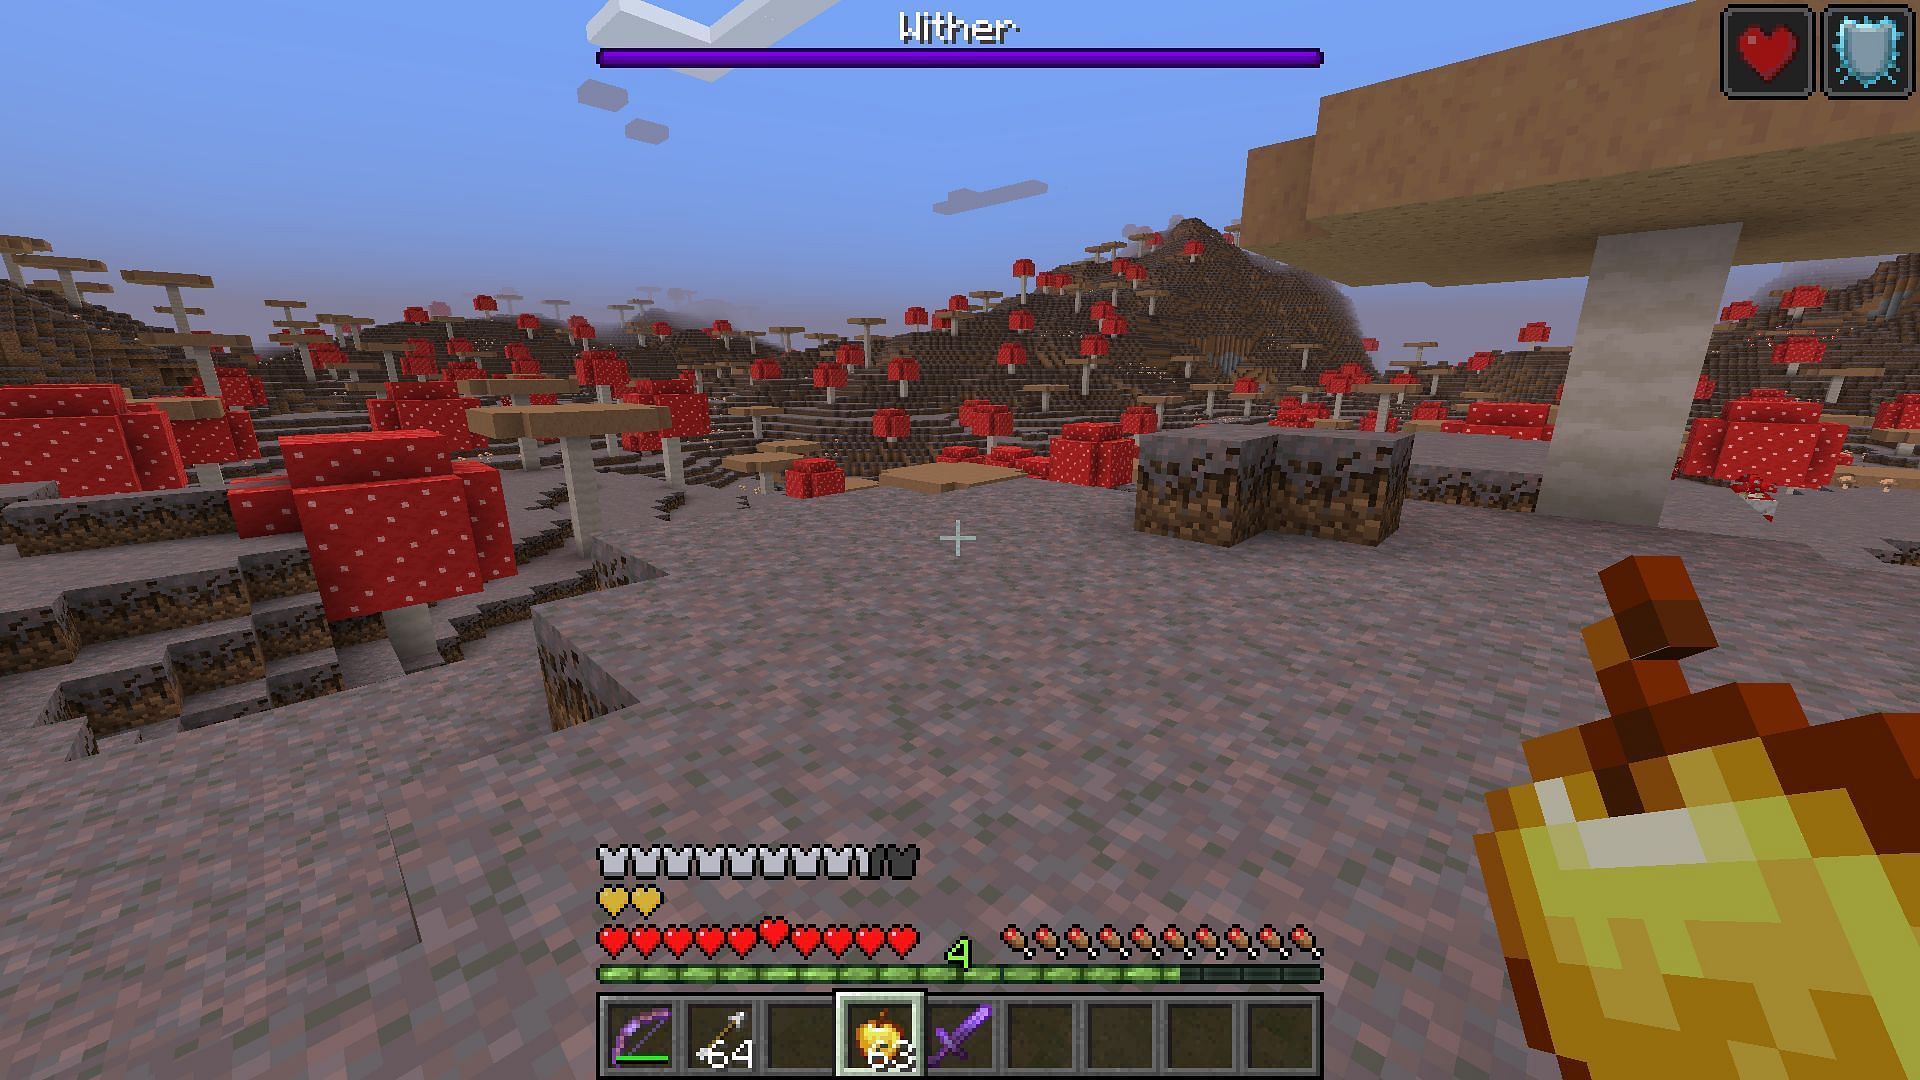 Golden apples will help players a lot during the Wither fight in Minecraft (Image via Mojang)